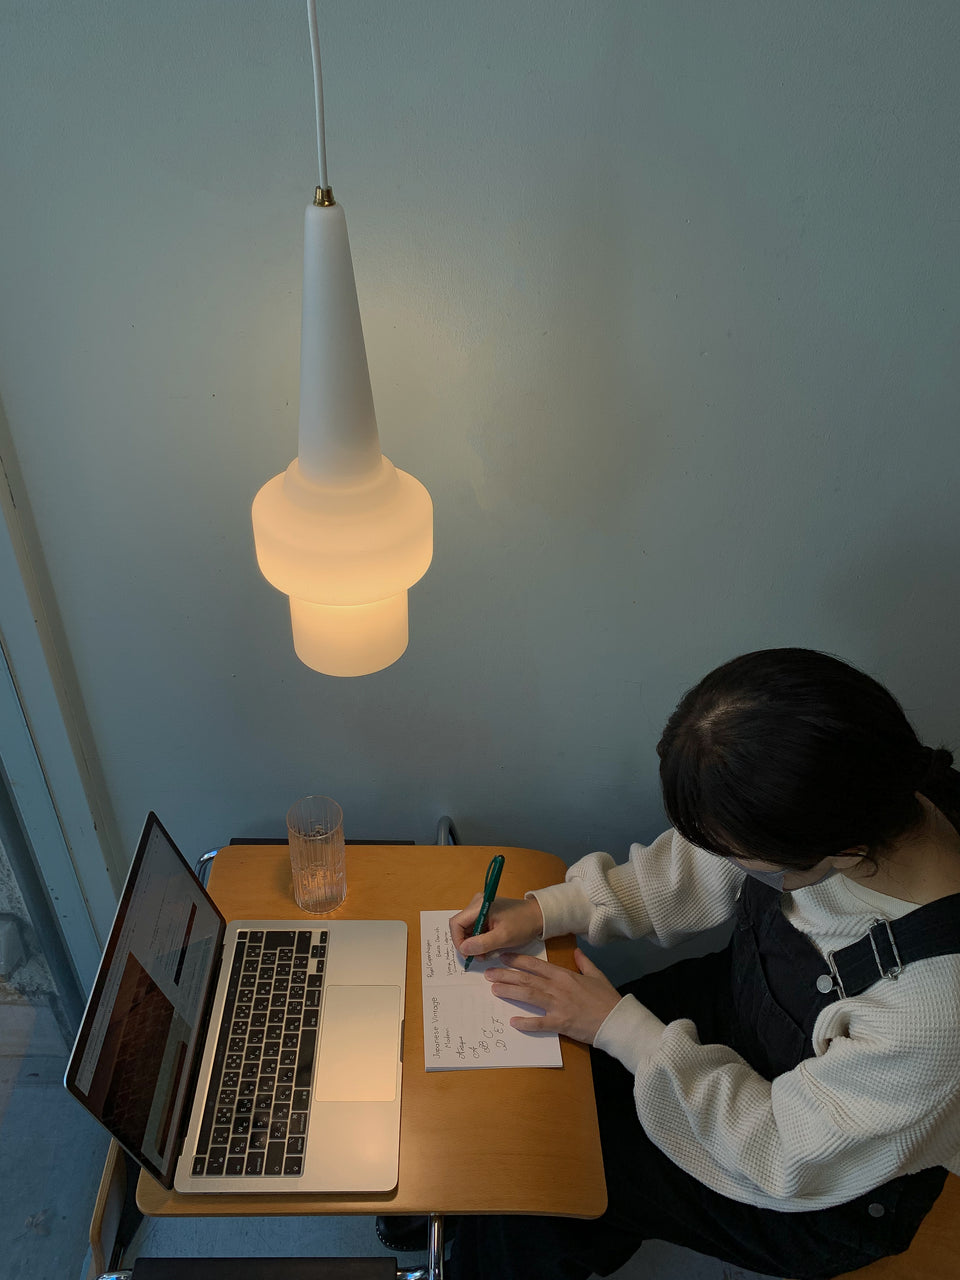 Opaline Frosted Glass Pendant Light Danish Vintage/デンマークヴィンテージ フロストガラス ペンダントライト 照明 北欧インテリア